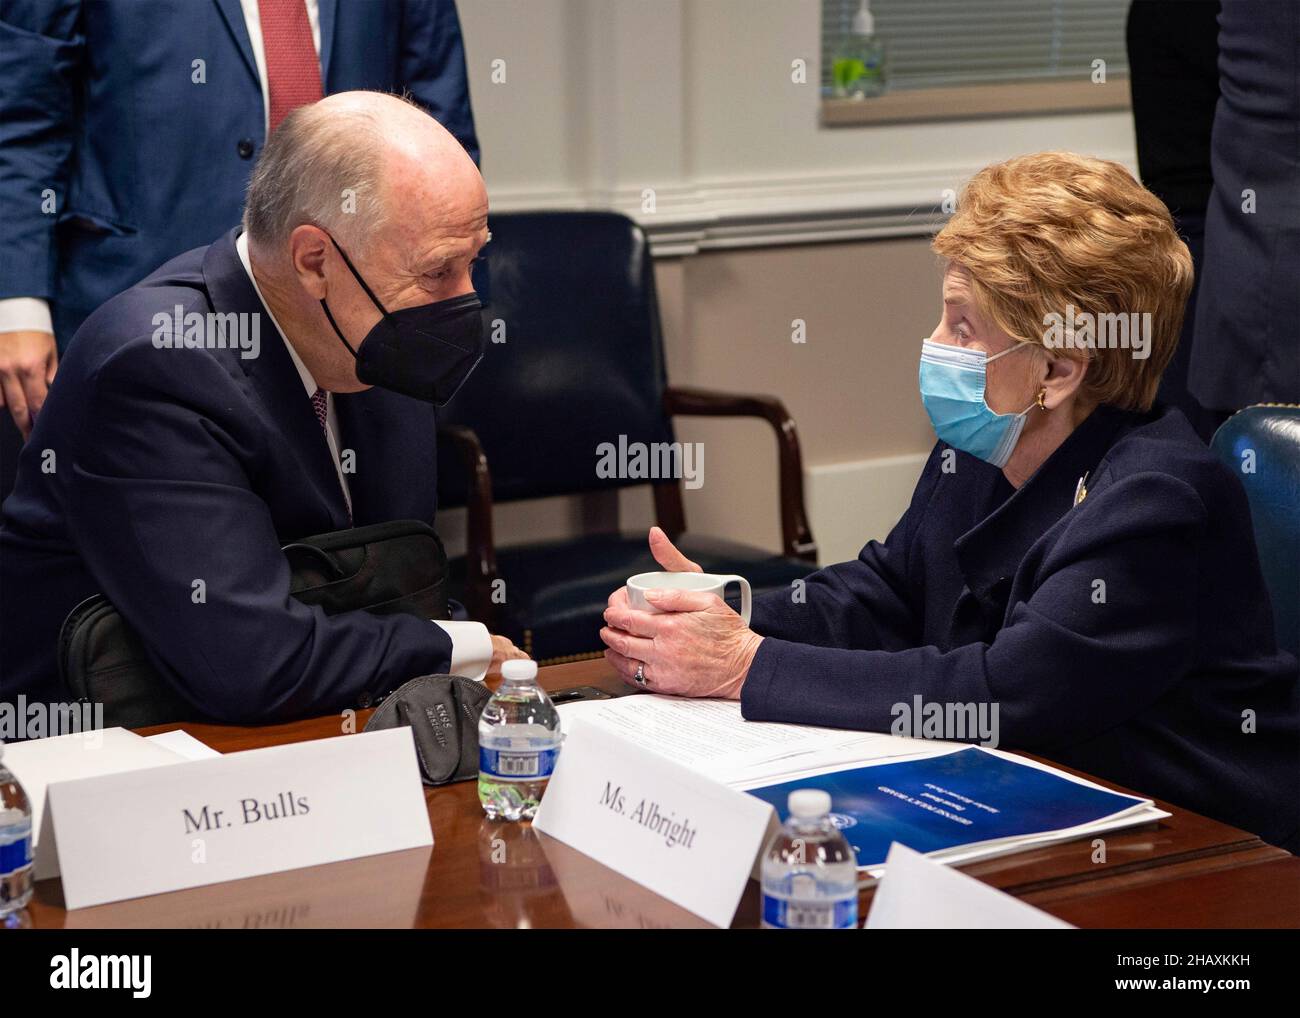 Arlington, United States Of America. 15th Dec, 2021. Arlington, United States of America. 15 December, 2021. Former U.S. Secretary of State, Madeleine Albright, right, greets Thomas E. Donilon, Chairman of the BlackRock Investment Institute, before the start of the Defense Policy Board meeting at the Pentagon, December 15, 2021 in Arlington, Virginia. Credit: PO1 Zachary Wheeler/DOD/Alamy Live News Stock Photo